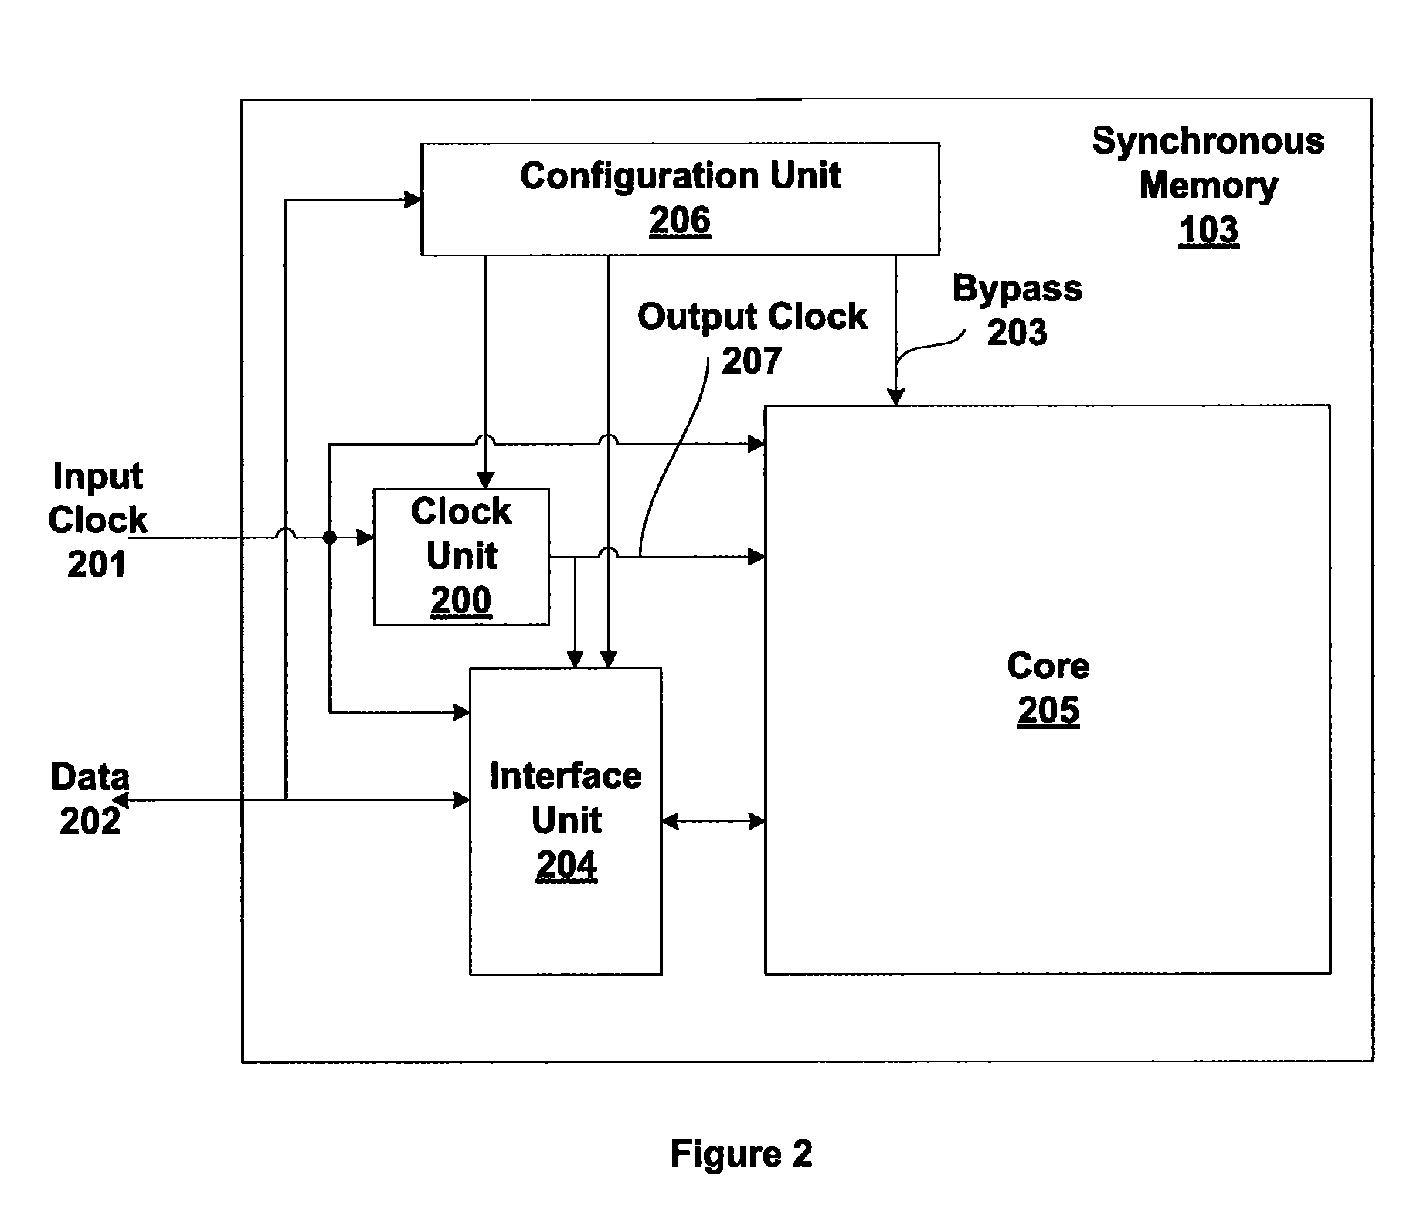 Low latency synchronous memory performance switching using update control